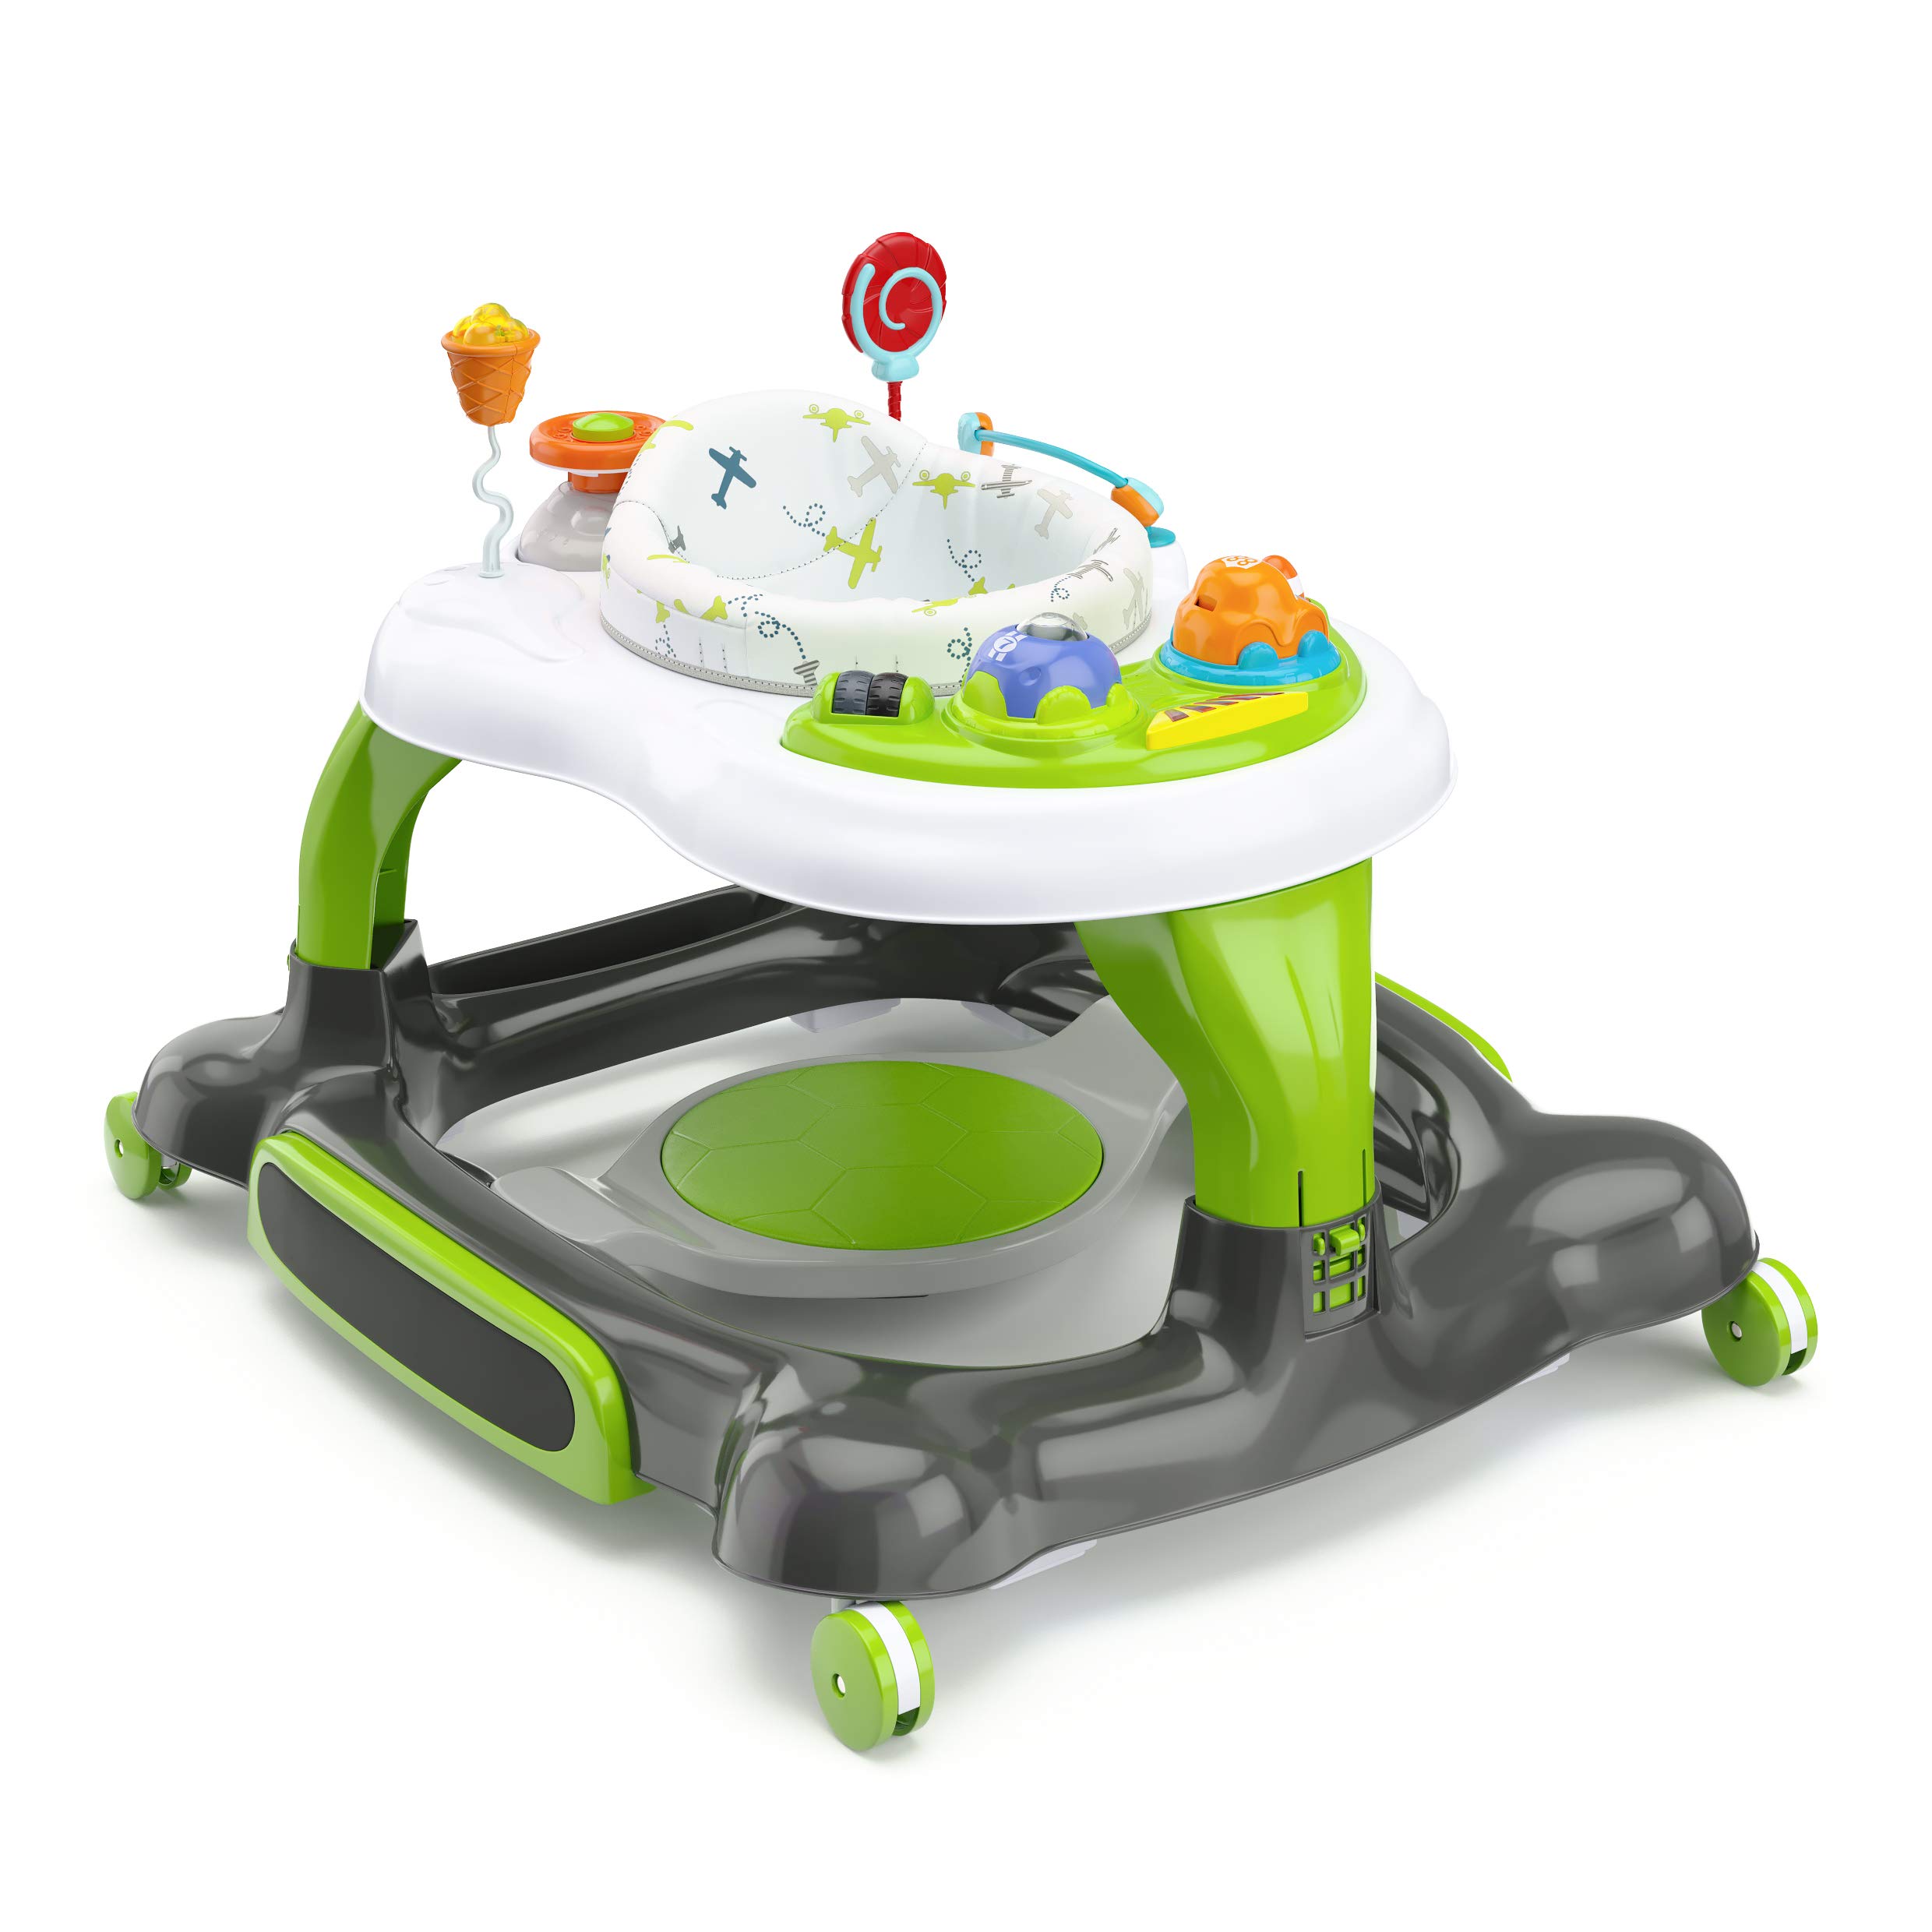 Storkcraft 3-in-1 Activity Walker and Rocker with Jumping Board and Feeding Tray, Interactive Walker with Toy Tray and Jumping Board for Toddlers and Infants, Green